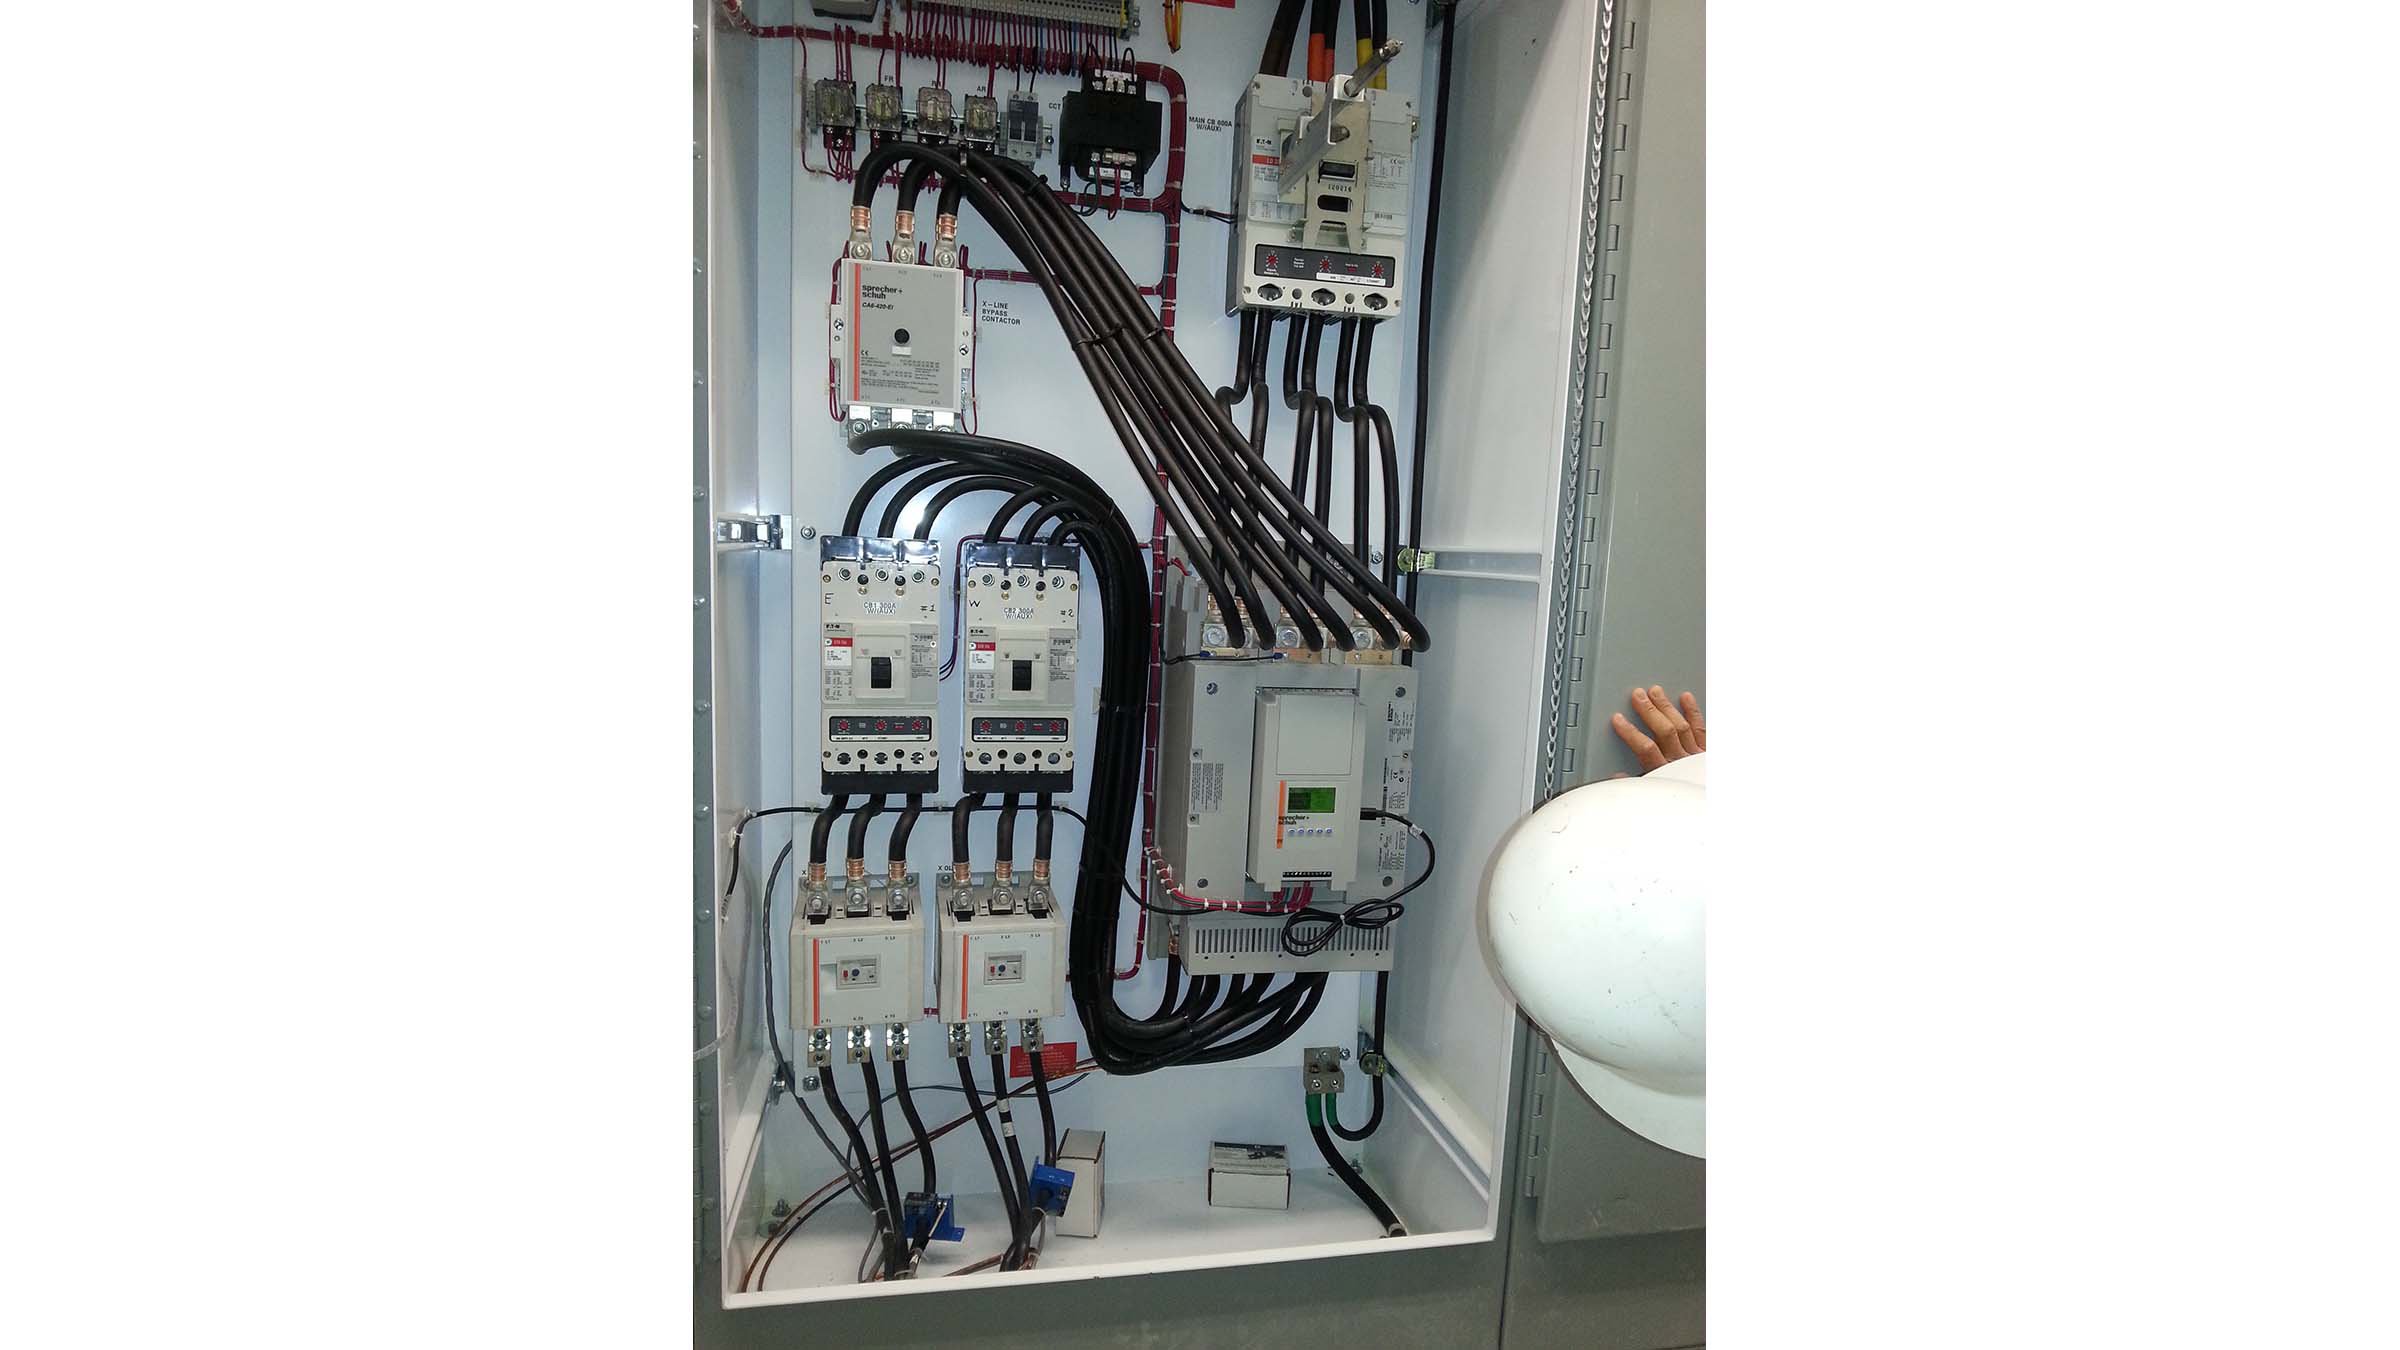 Softstarter motor control panel for Cemex plant in Florida to control the material handling conveyors